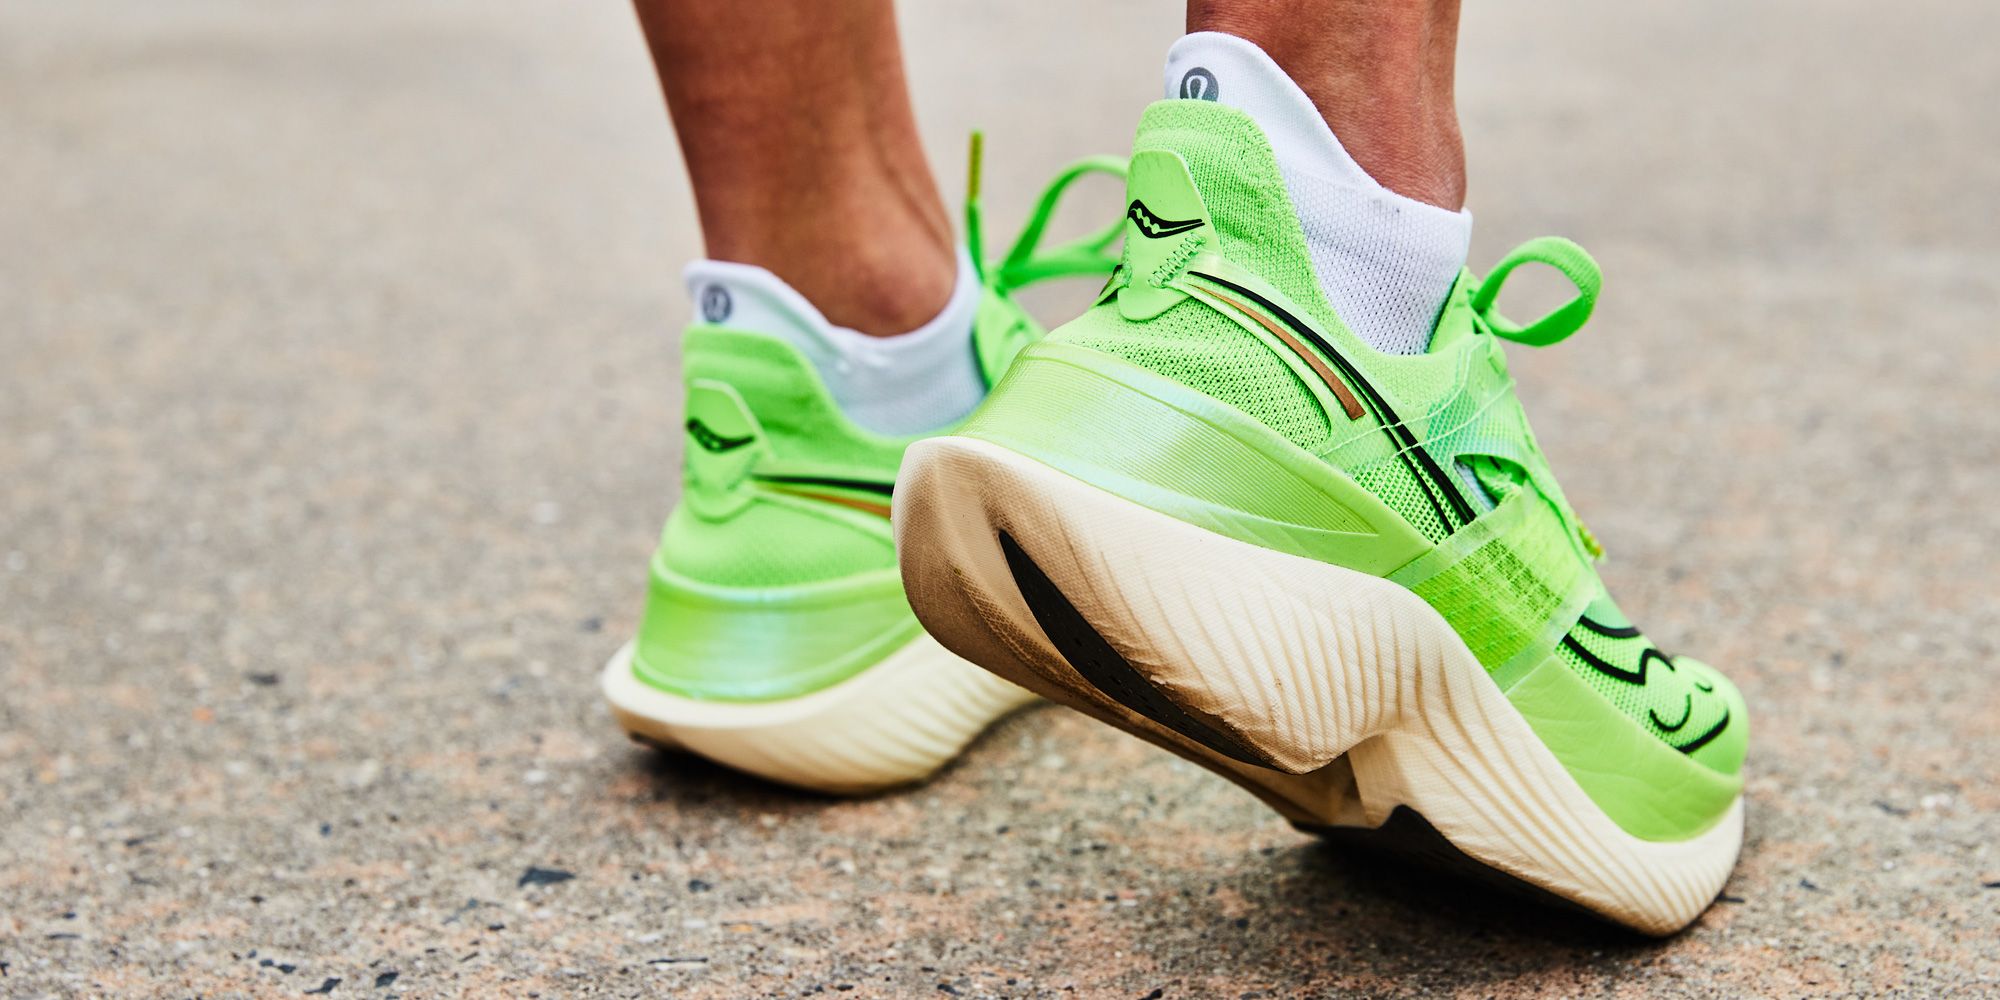 What is the Newest Model of Saucony?